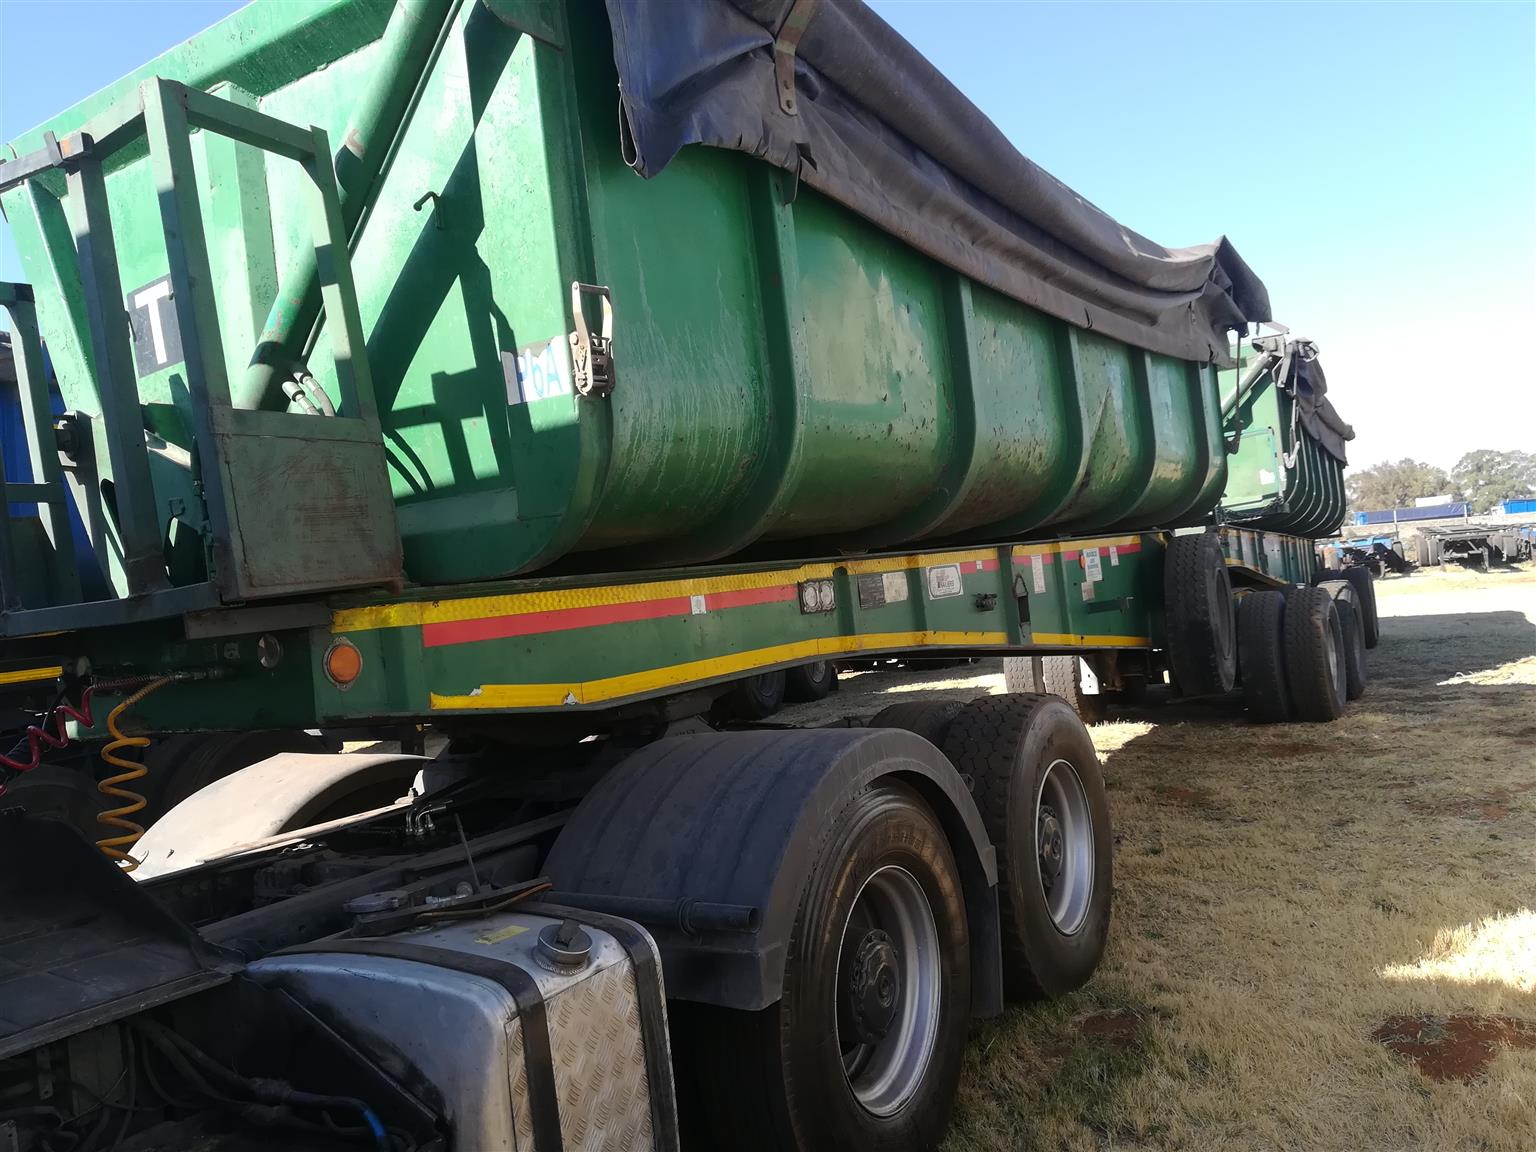 Start Your Own Trucking Business, 34 Ton Side Tippers, Become A Trucker, New Truckers Welcome, Kwazulu-Natal Province, South Africa